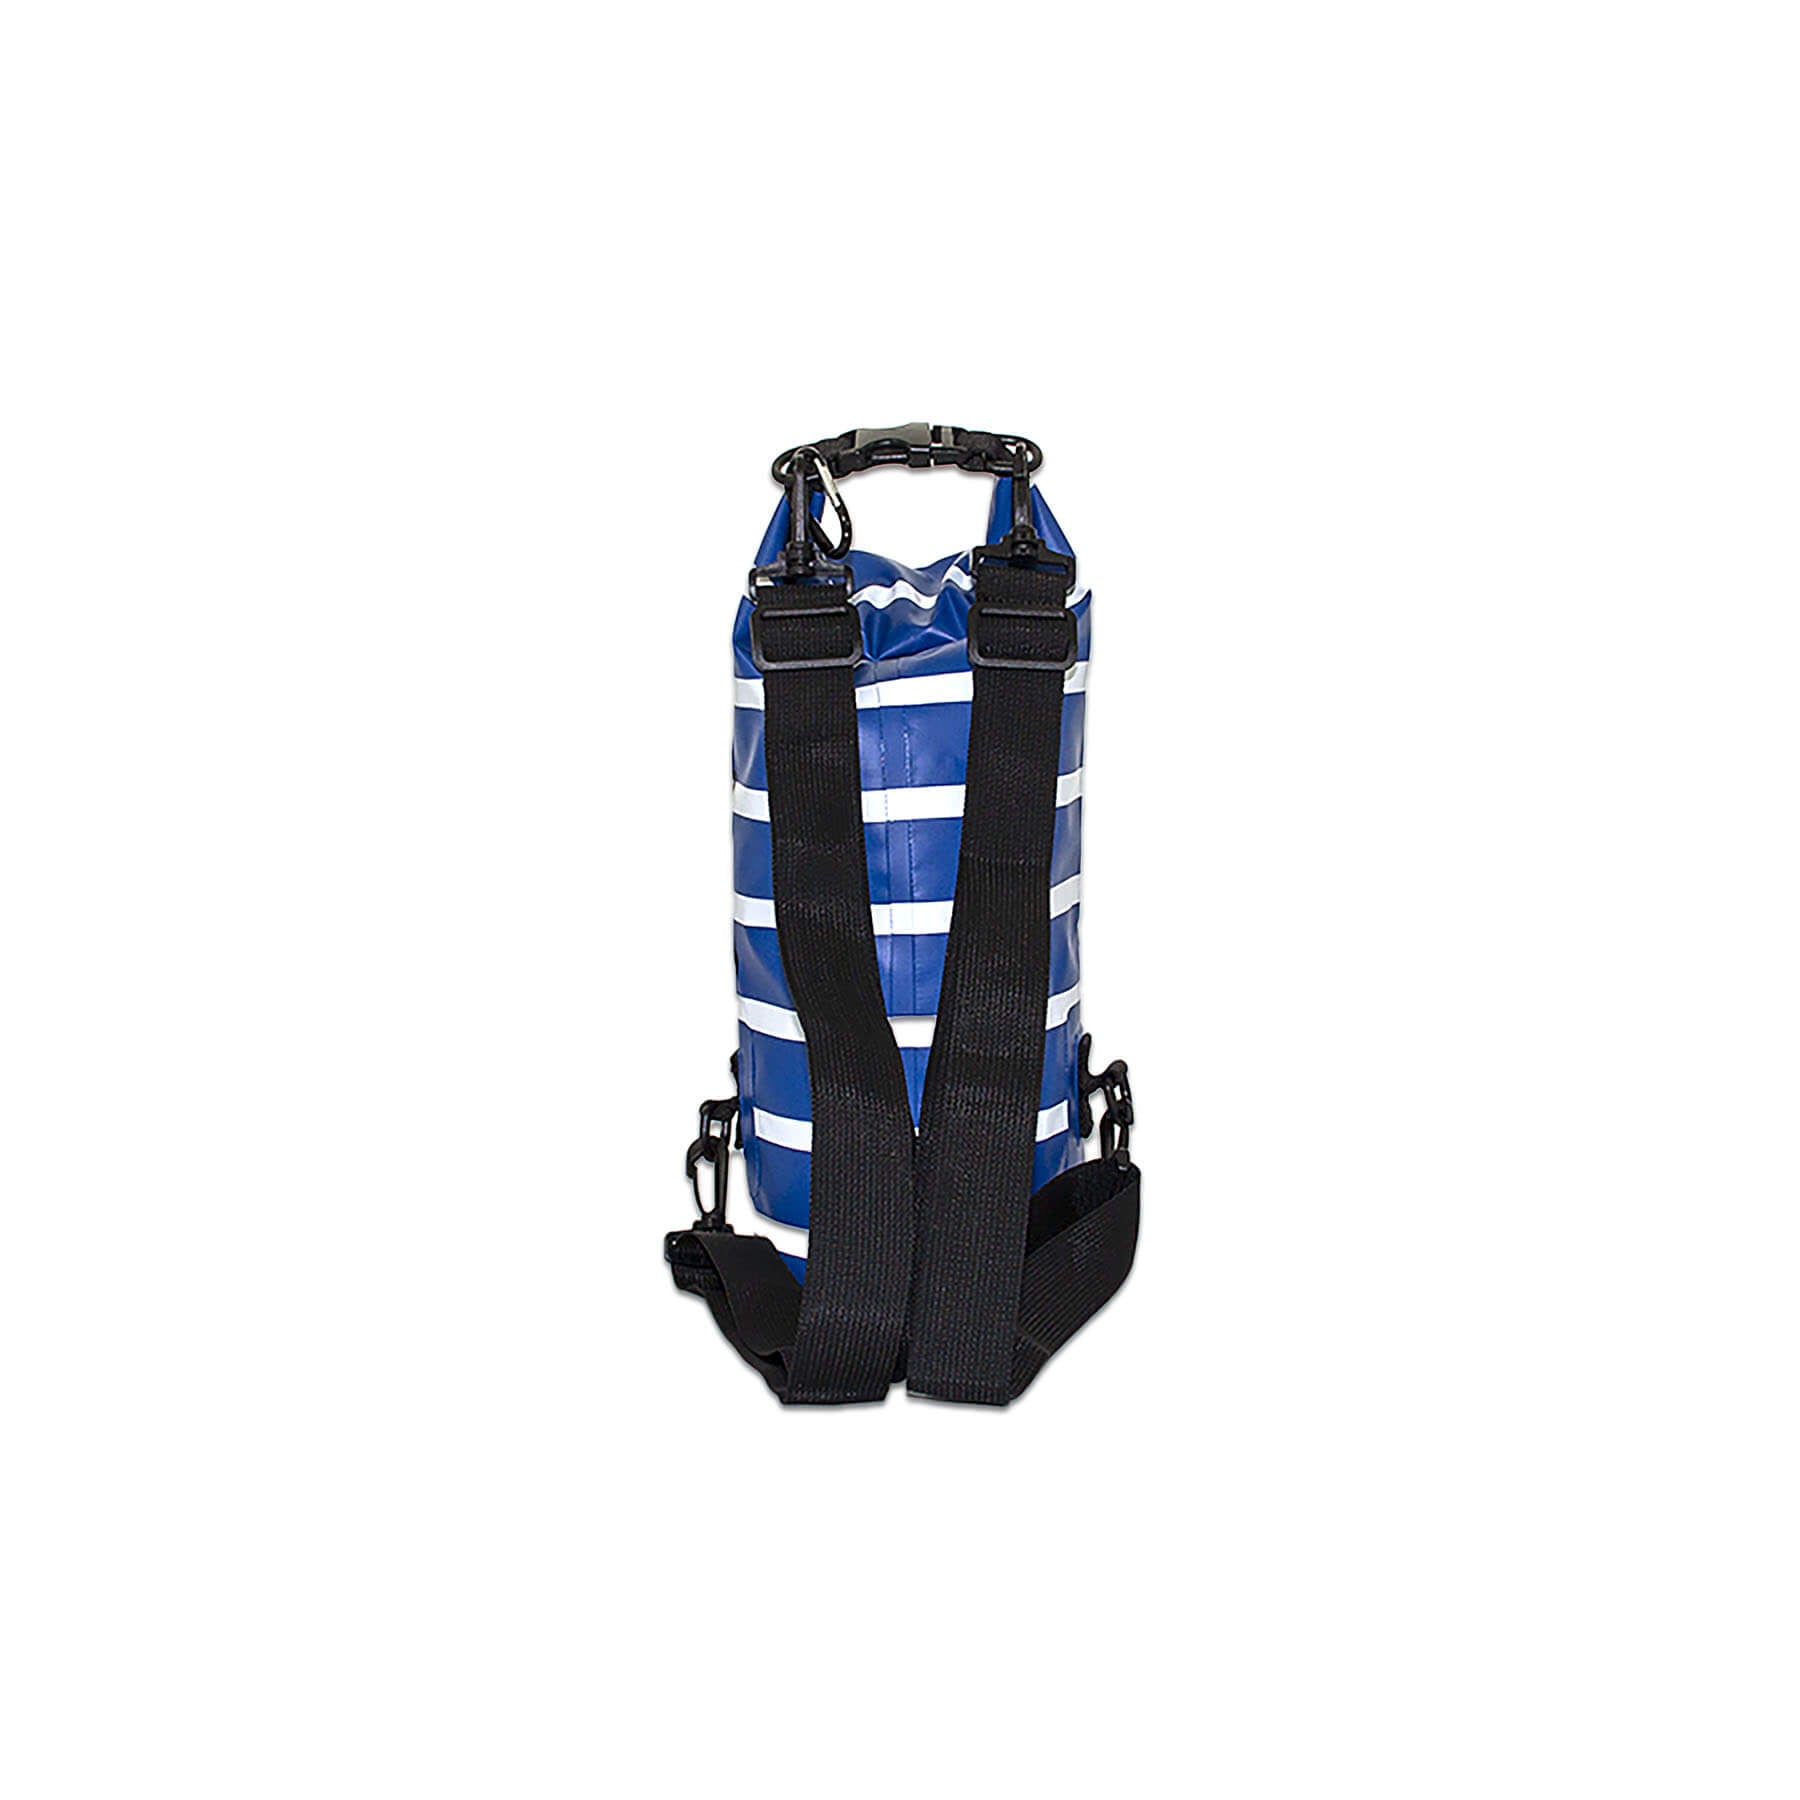 waterproof dry bag 5 litres a handy grab size with detachable straps and carabiner  nautical look back view